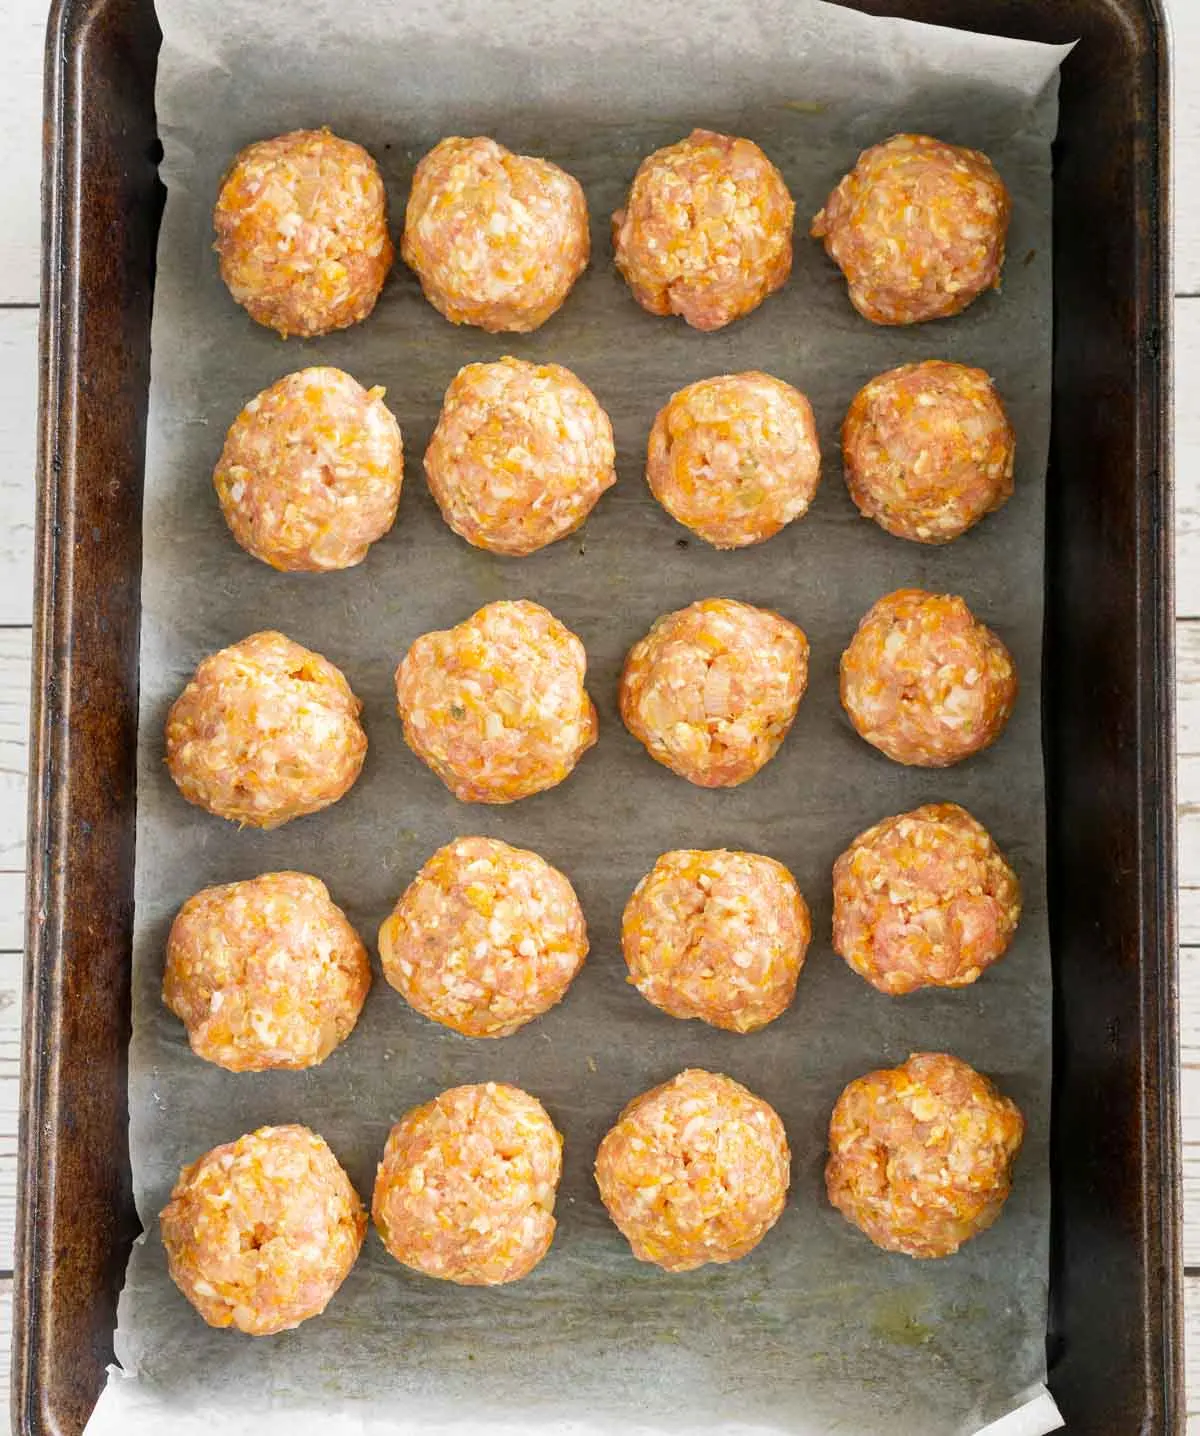 Uncooked pork meatballs arranged on a baking sheet with parchment paper